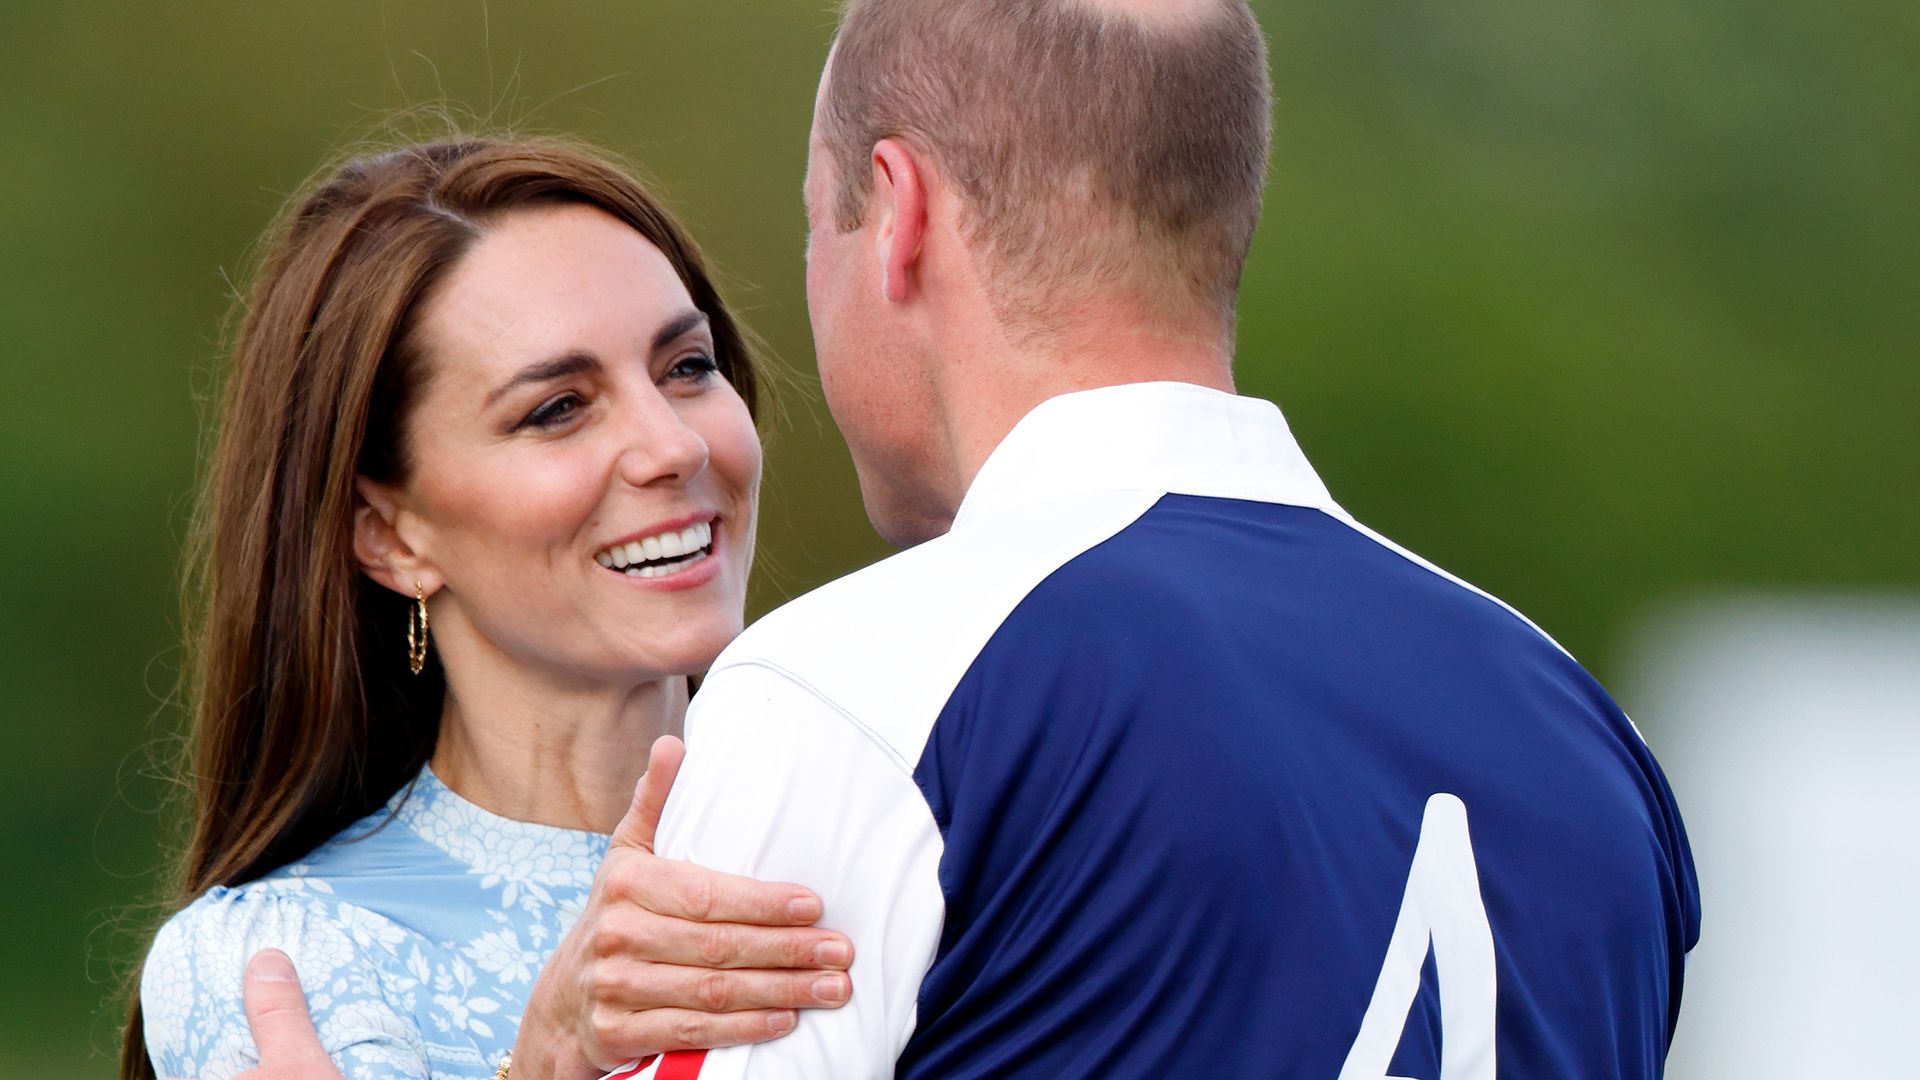 The Princess of Wales embraces Prince William, Prince of Wales during the prize giving following the Out-Sourcing Inc. Royal Charity Polo Cup 2023 at Guards Polo Club, Flemish Farm on July 6, 2023